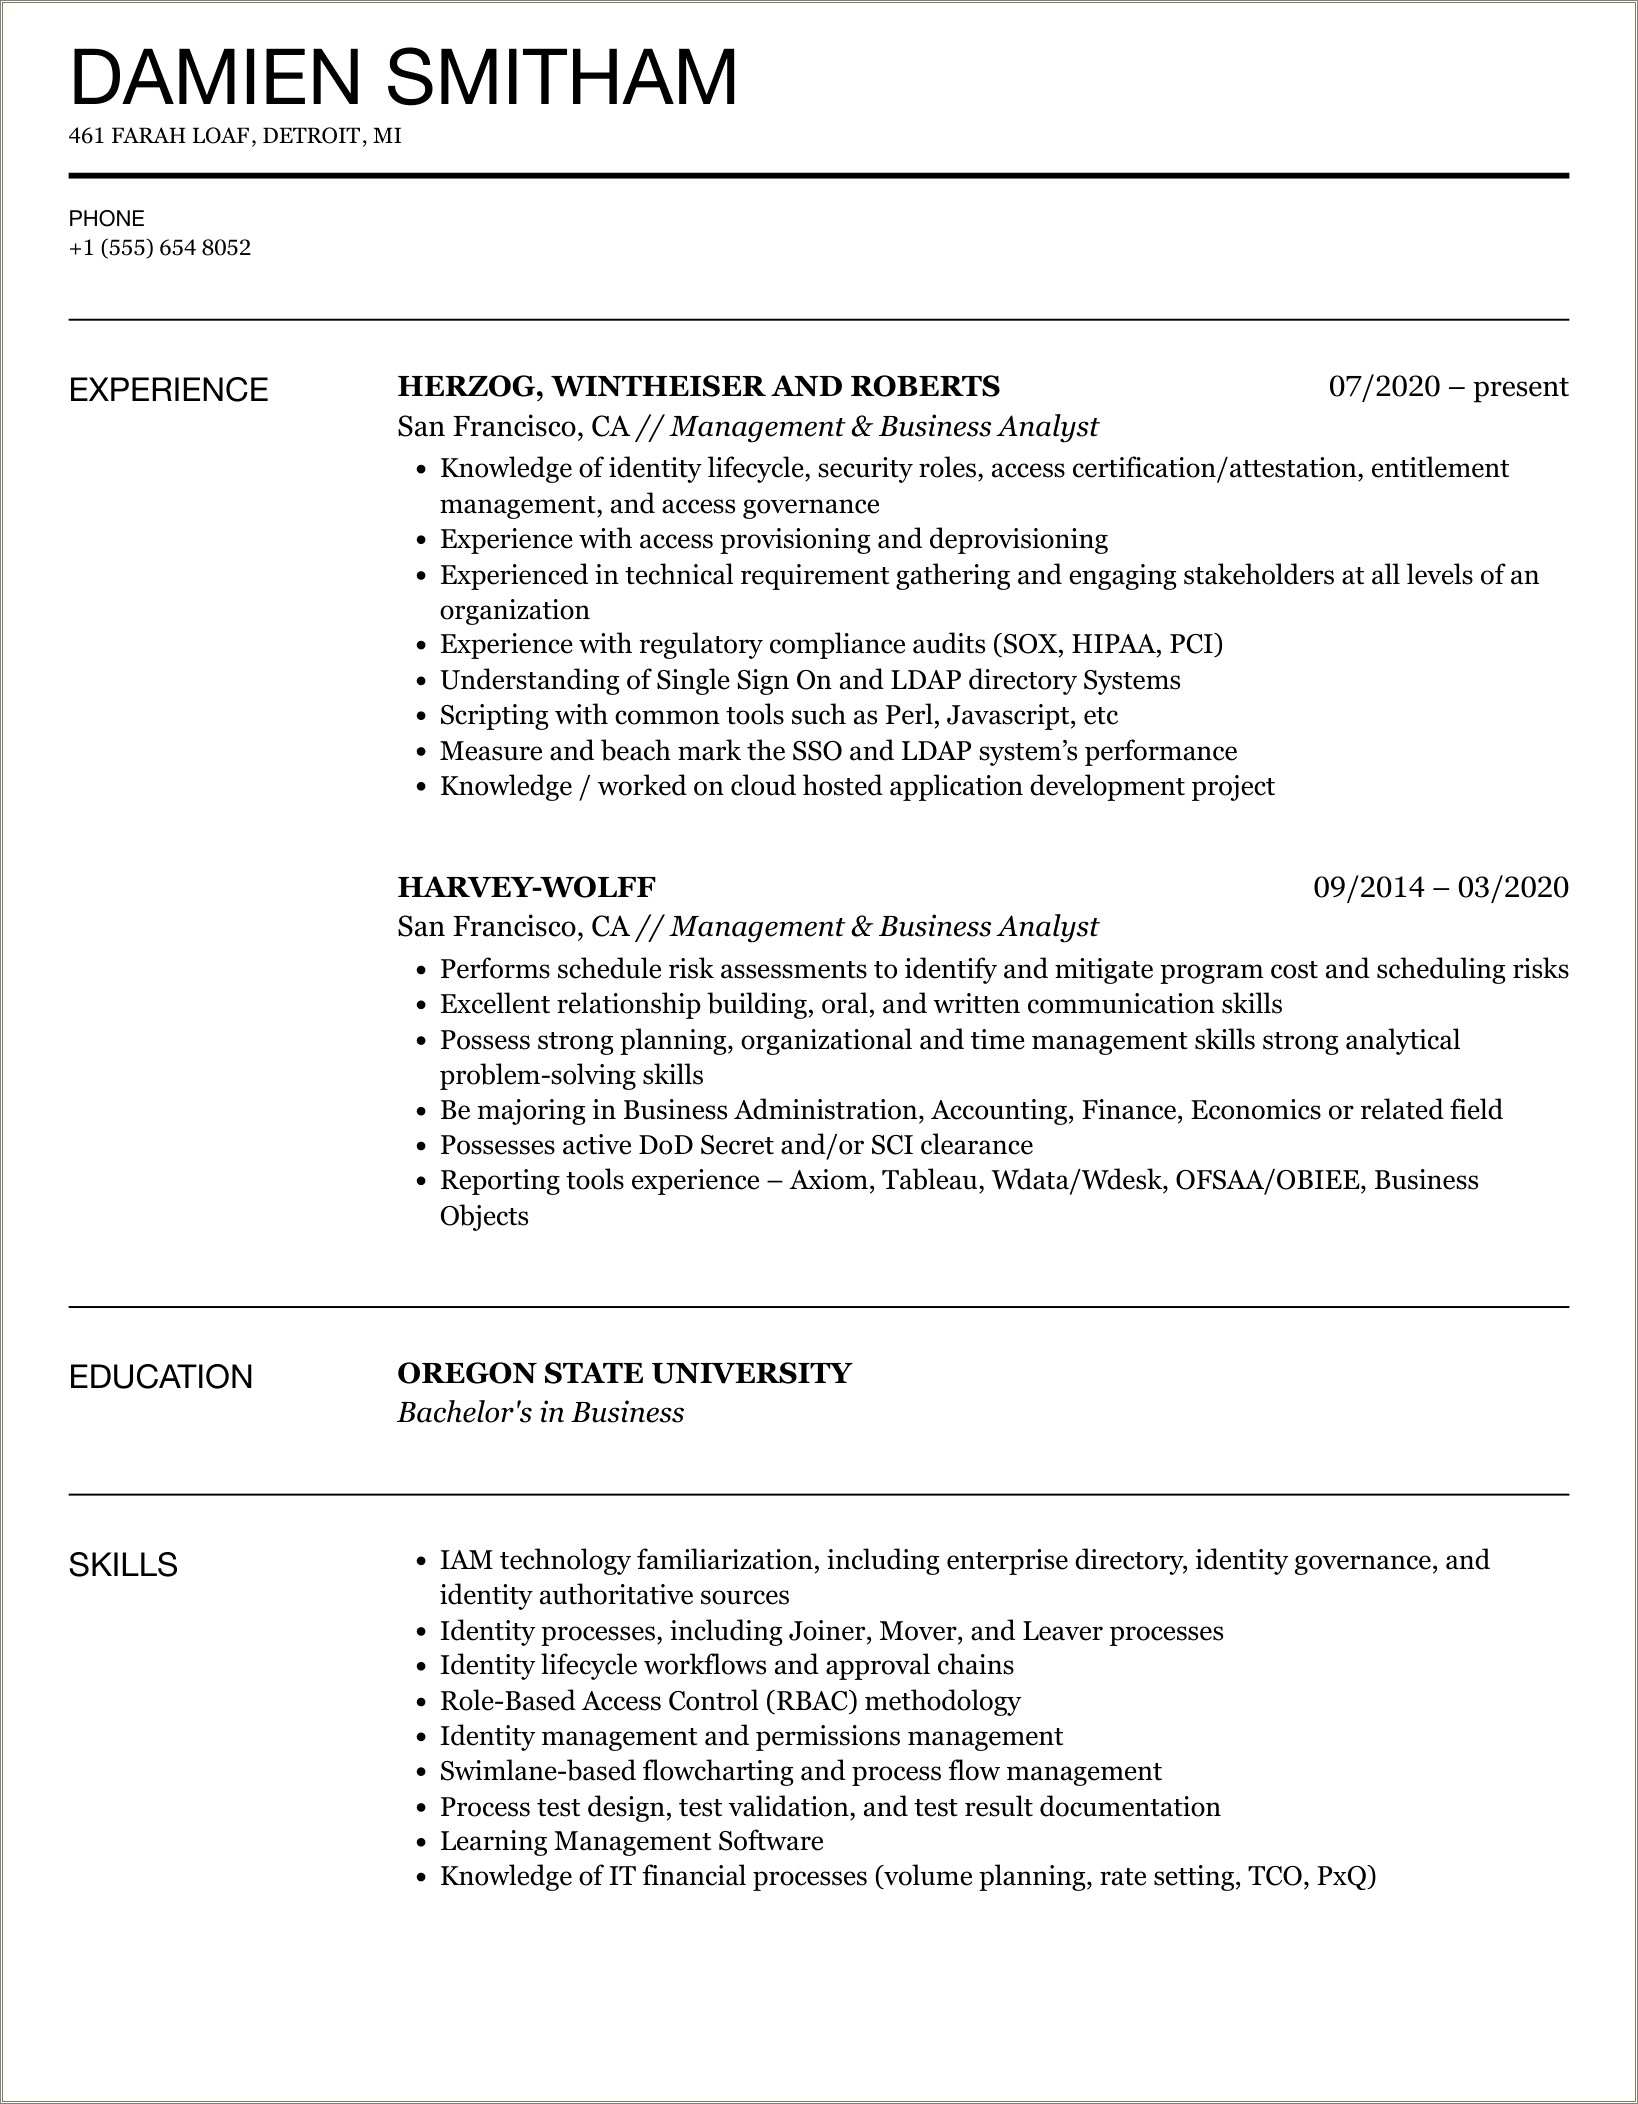 Business Analyst With Sm Experience Resume Samples